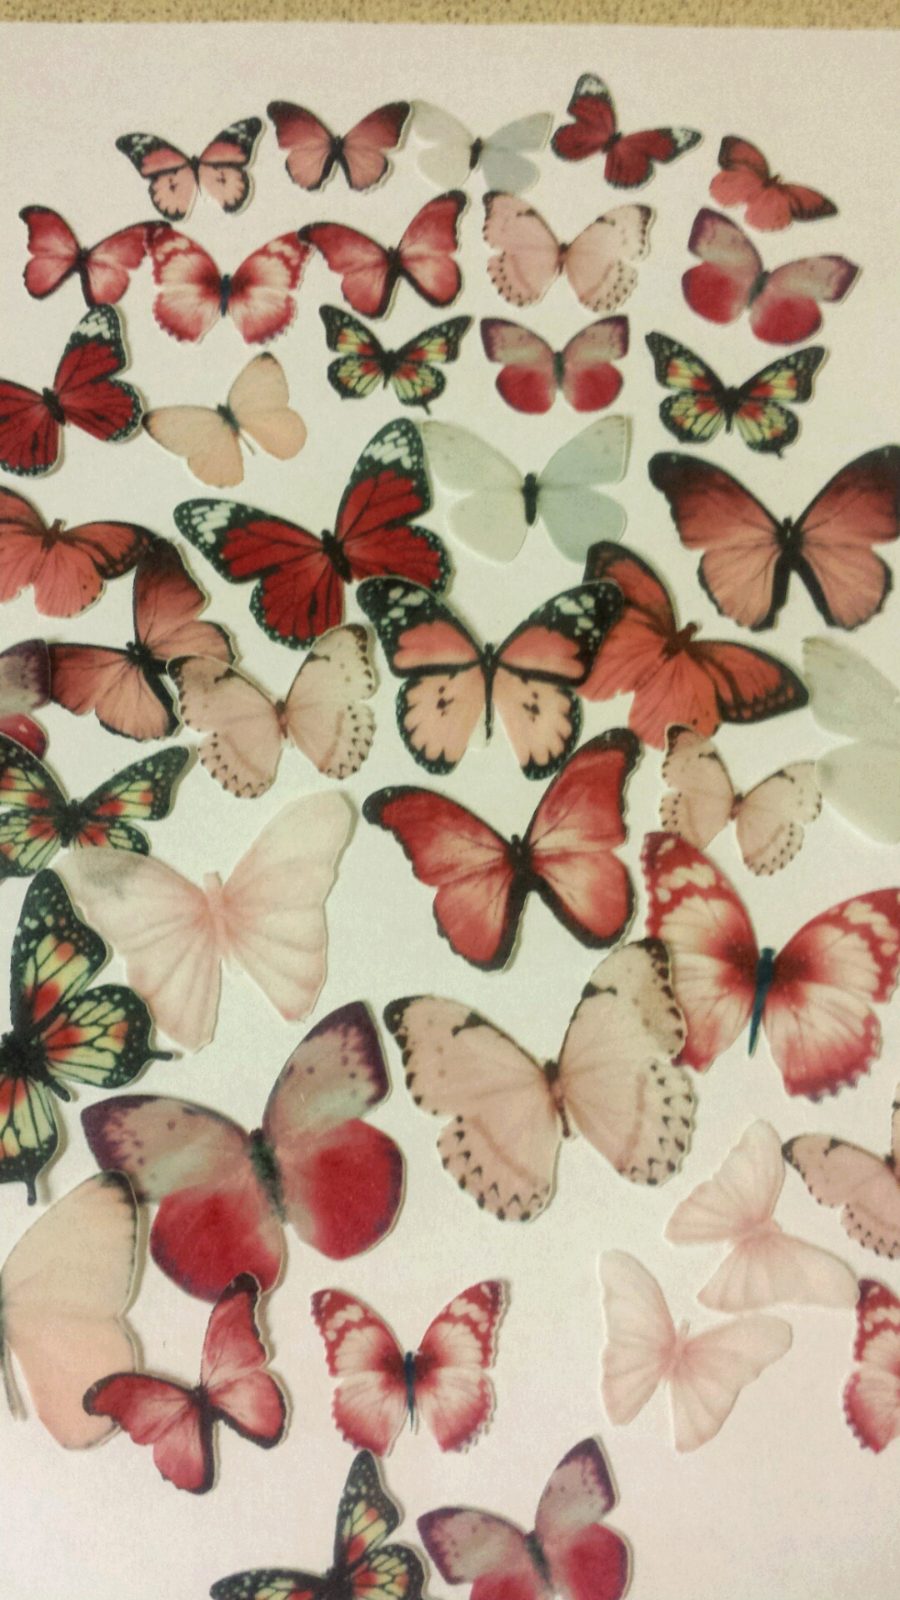 48 PRECUT Pink Mix Edible wafer/rice paper Butterflies cake/cupcake toppers